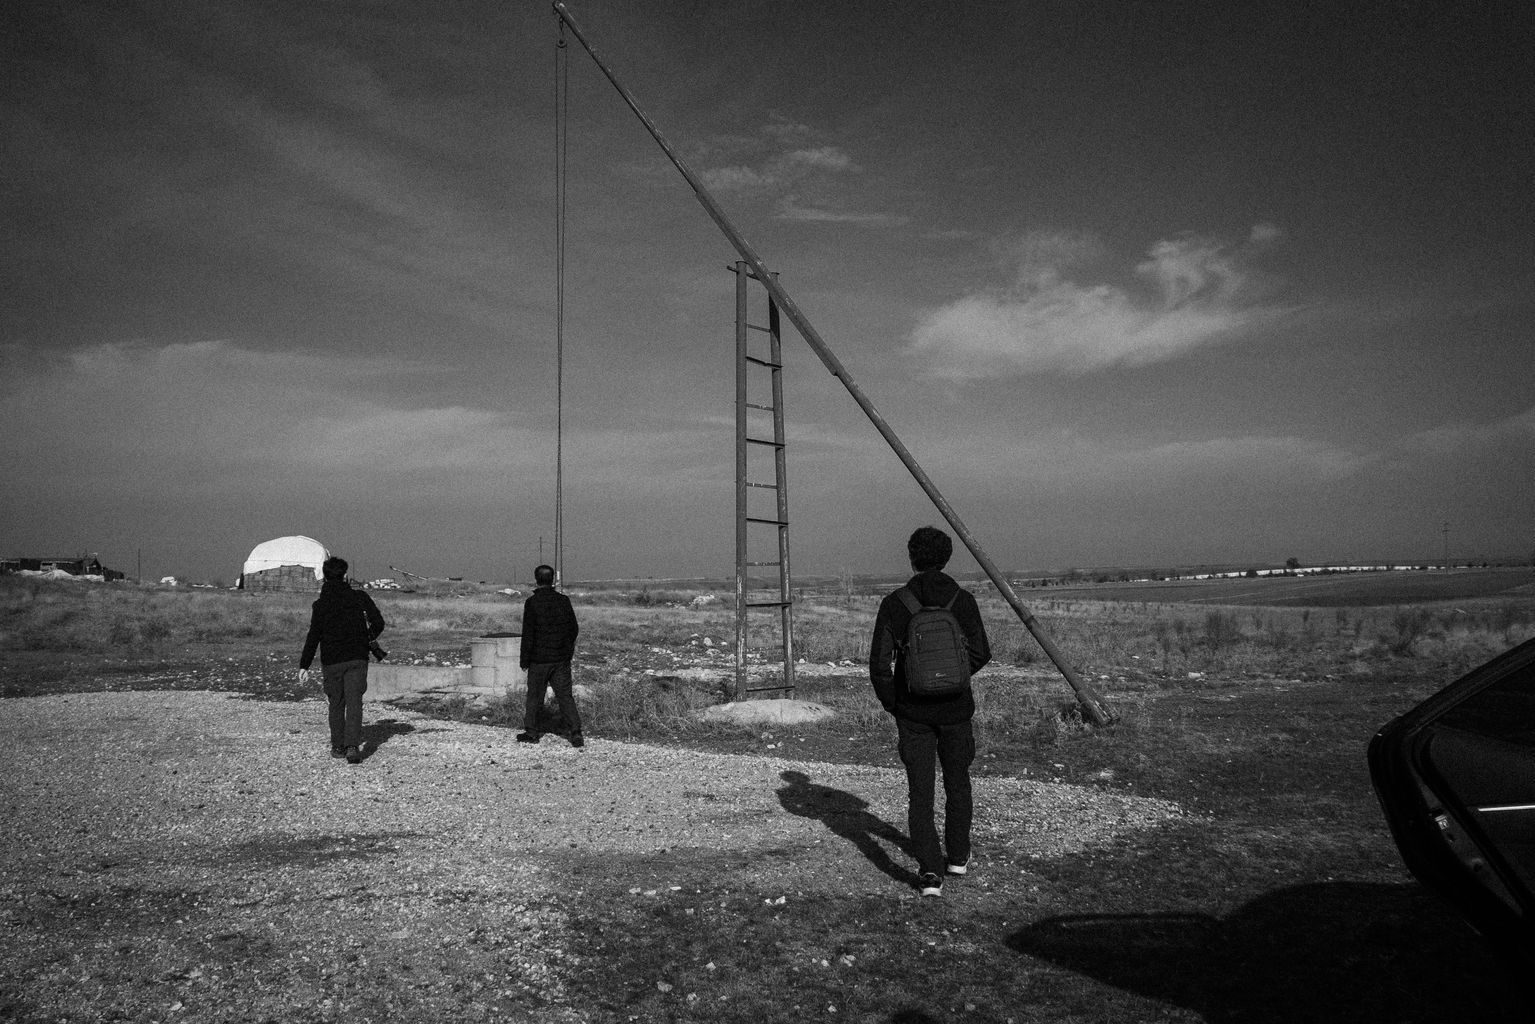 Black and white photo of people standing near a pole